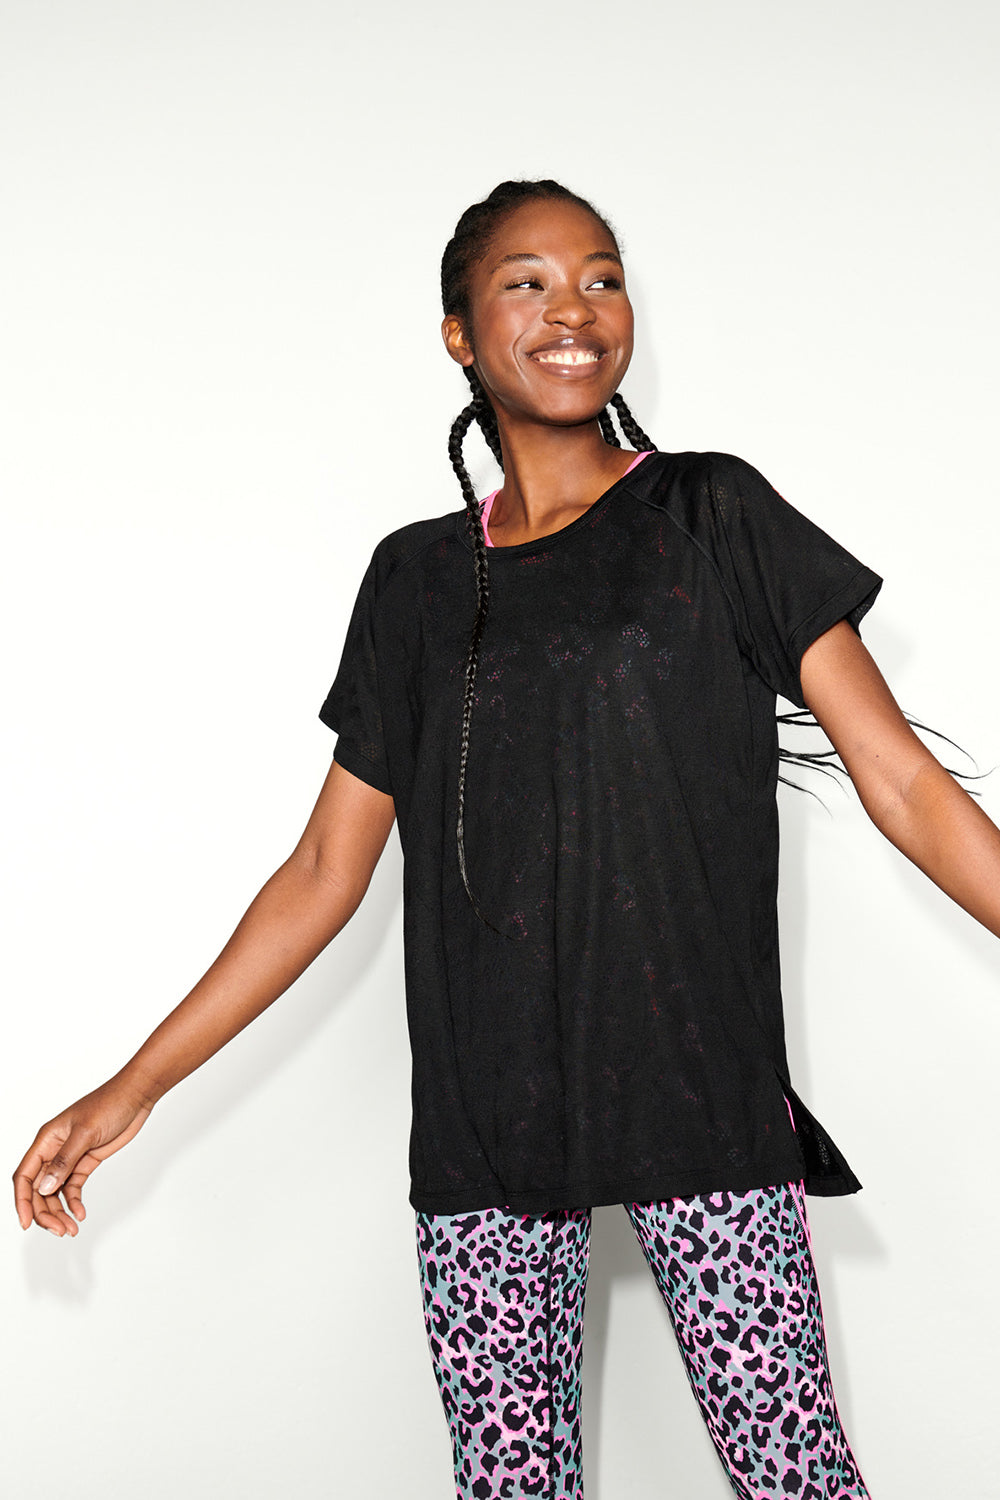 COMING SOON: Black Leopard Burn Out Slouchy T-Shirt